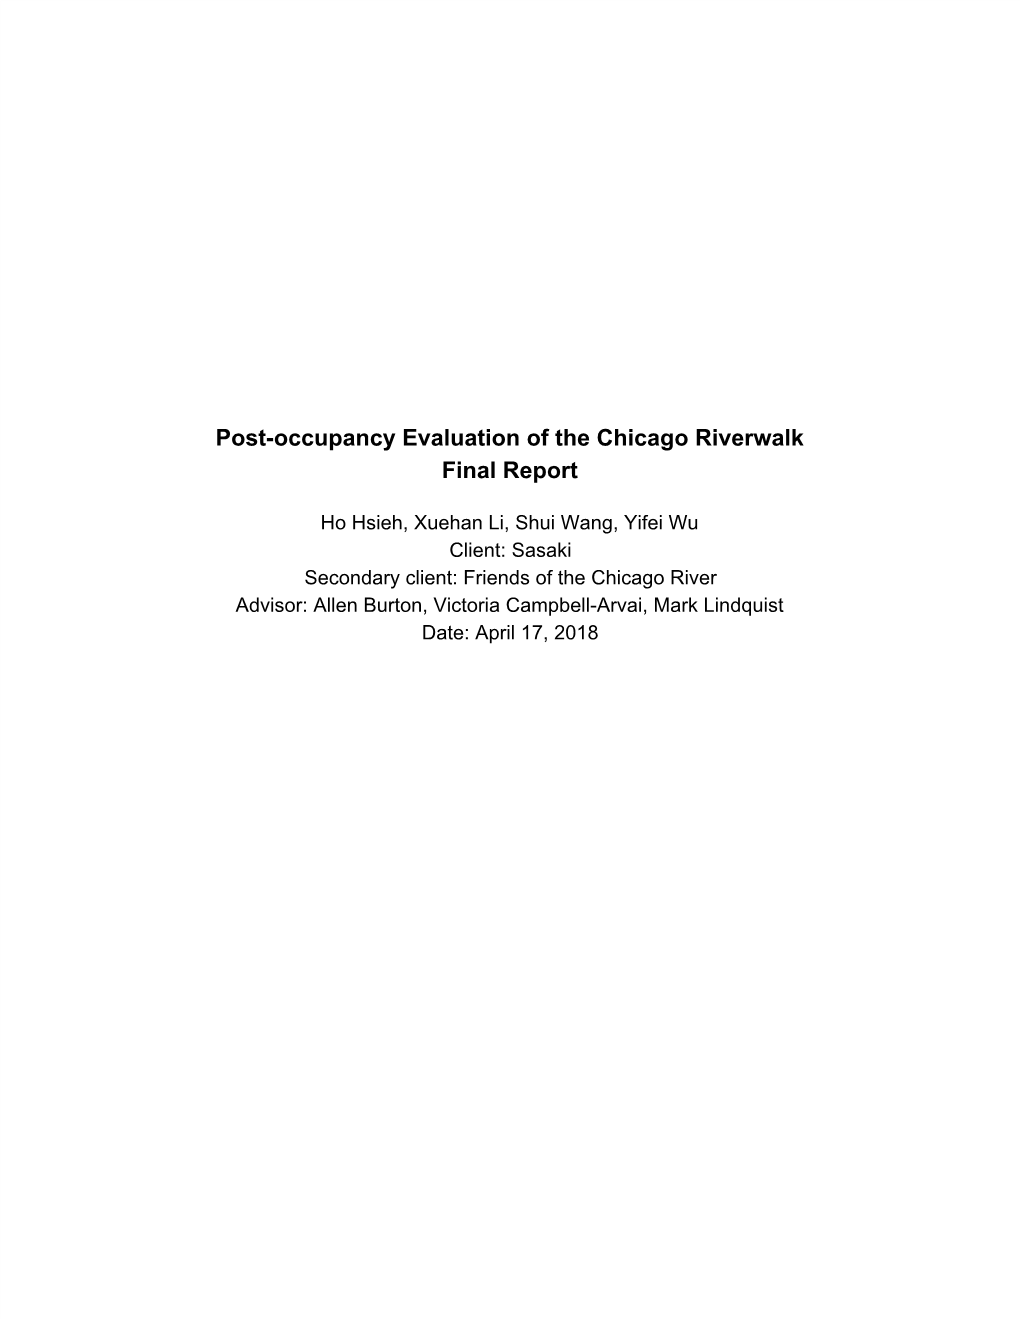 Post-Occupancy Evaluation of the Chicago Riverwalk Final Report